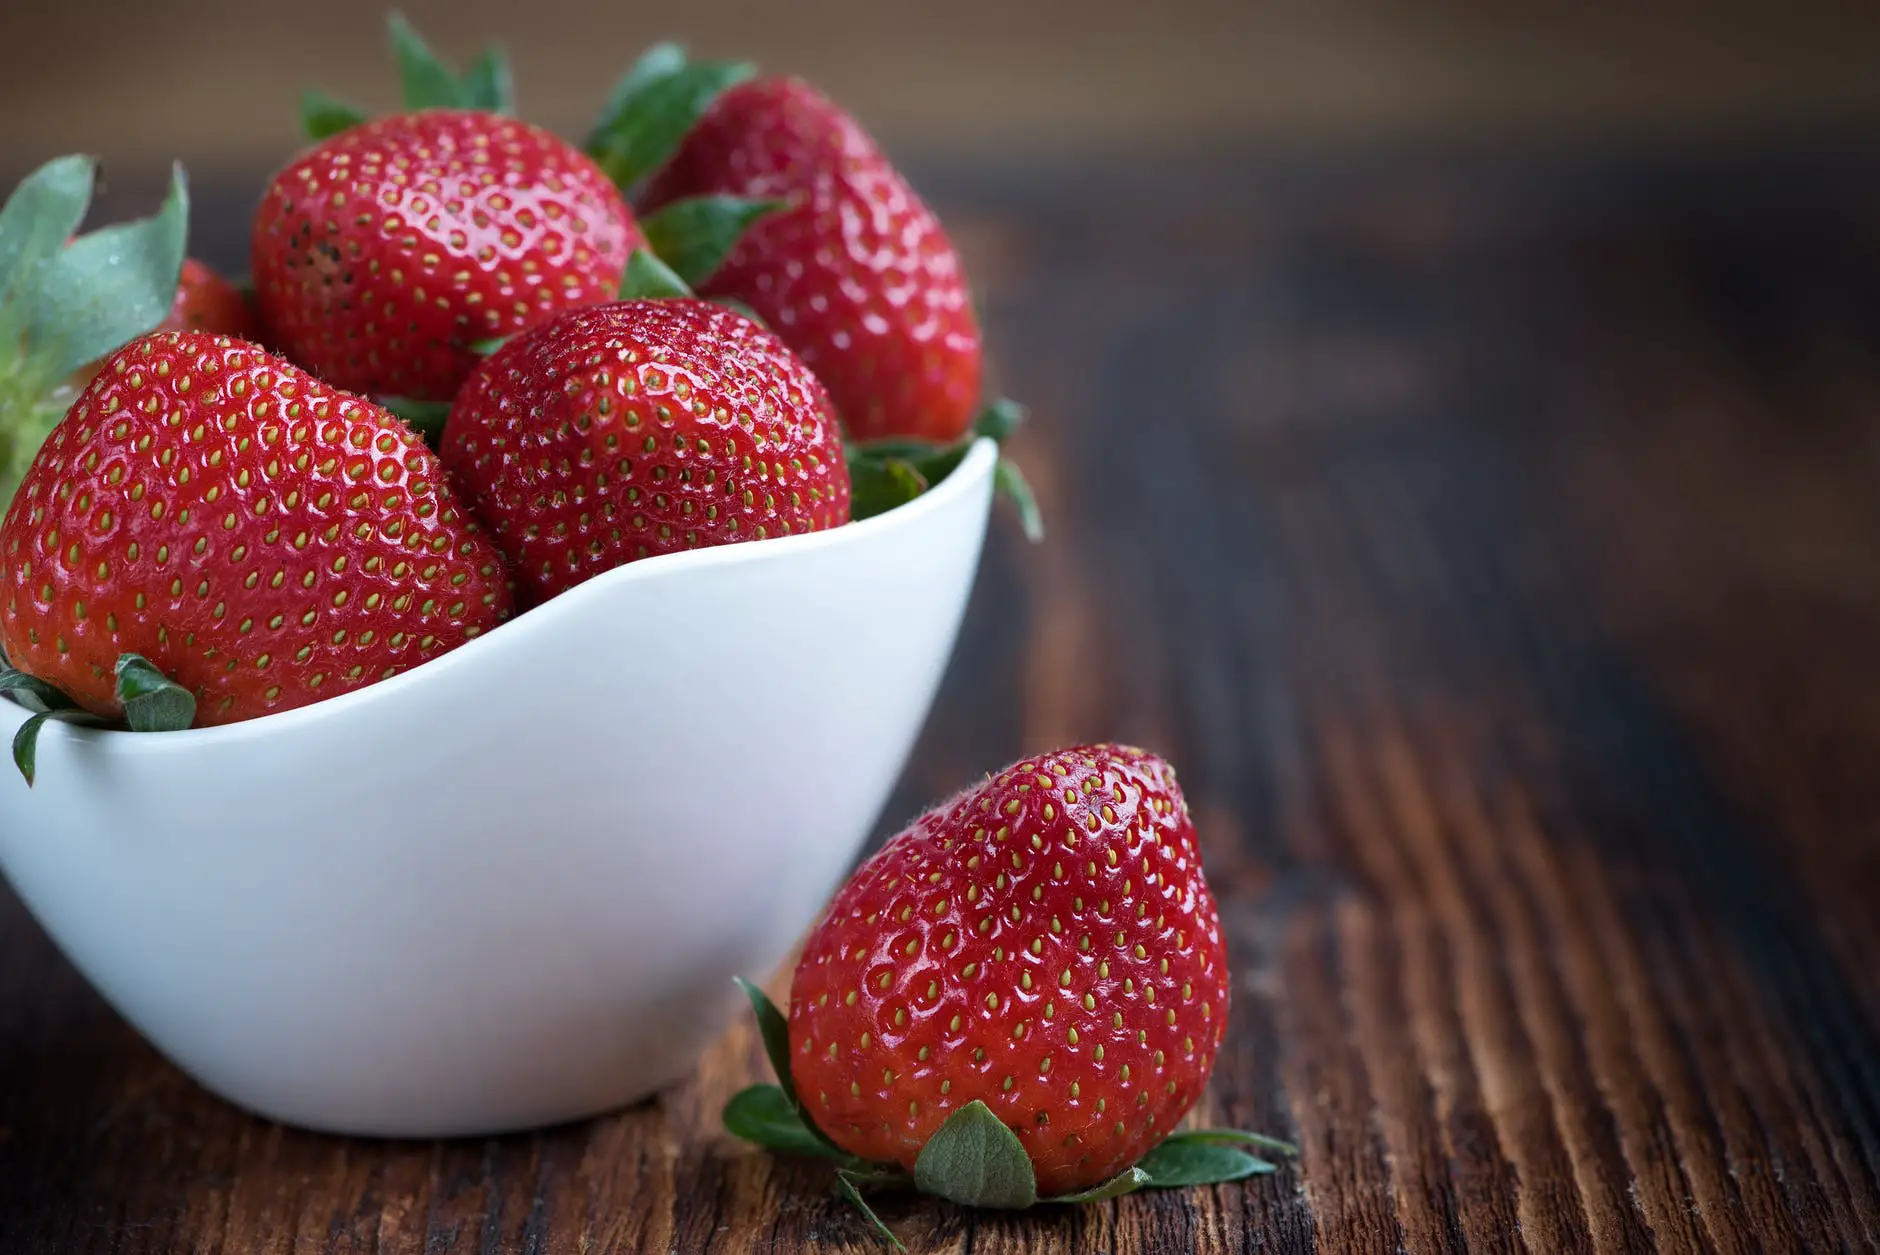 Grow your own strawberries